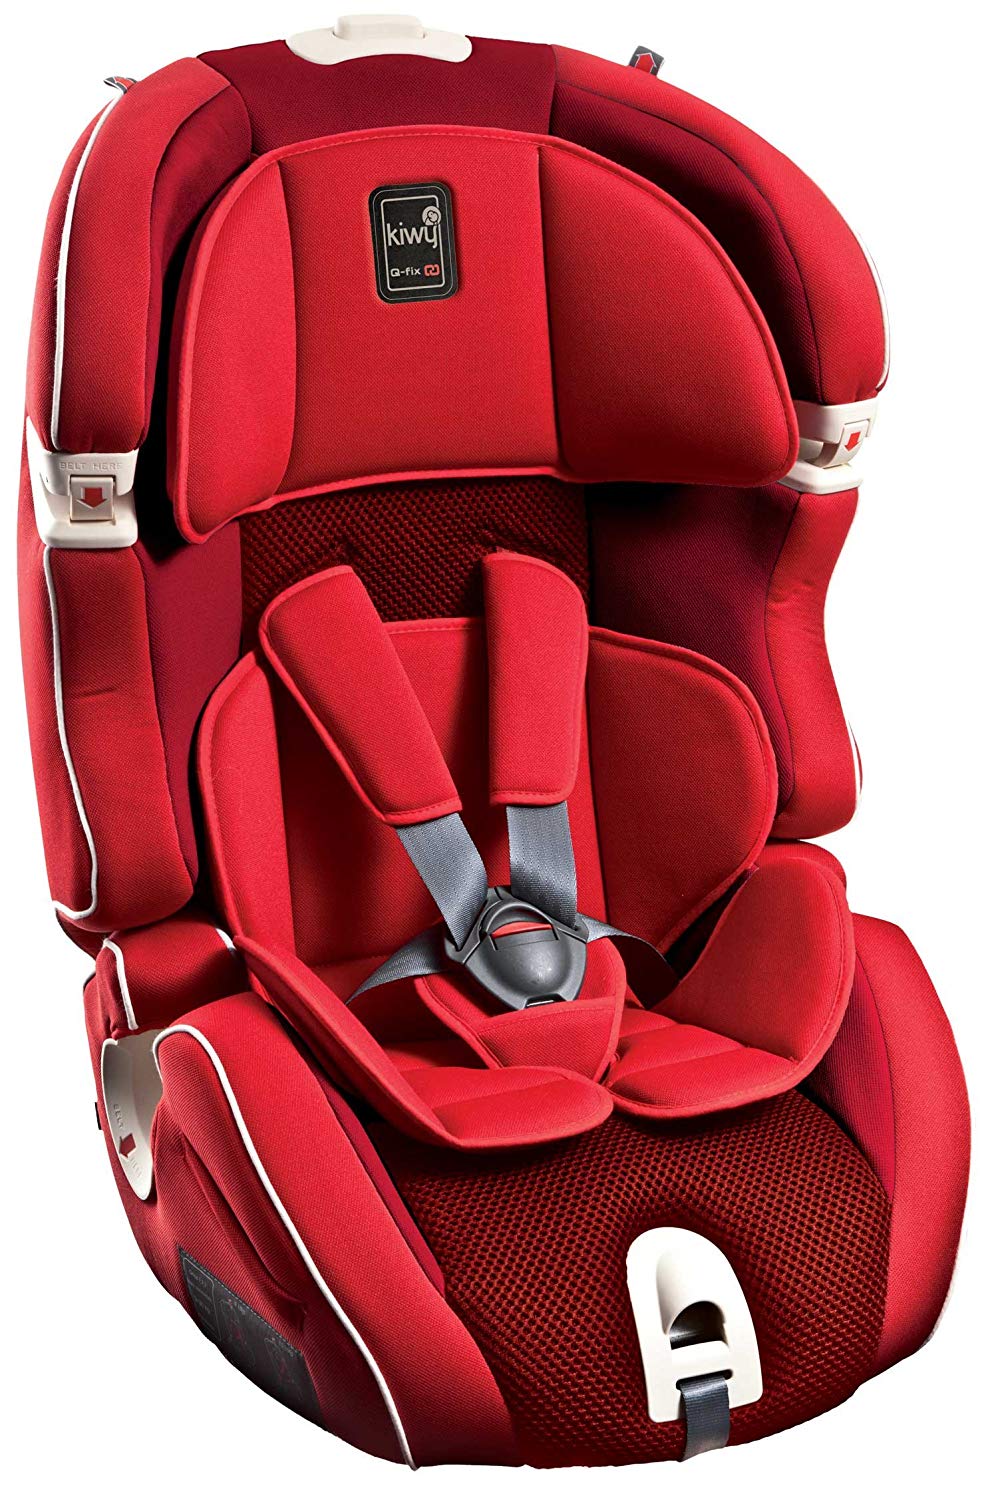 Honest Forwarder  Kiwy Fbrowse Child Car Seat Group 1/2/3 with